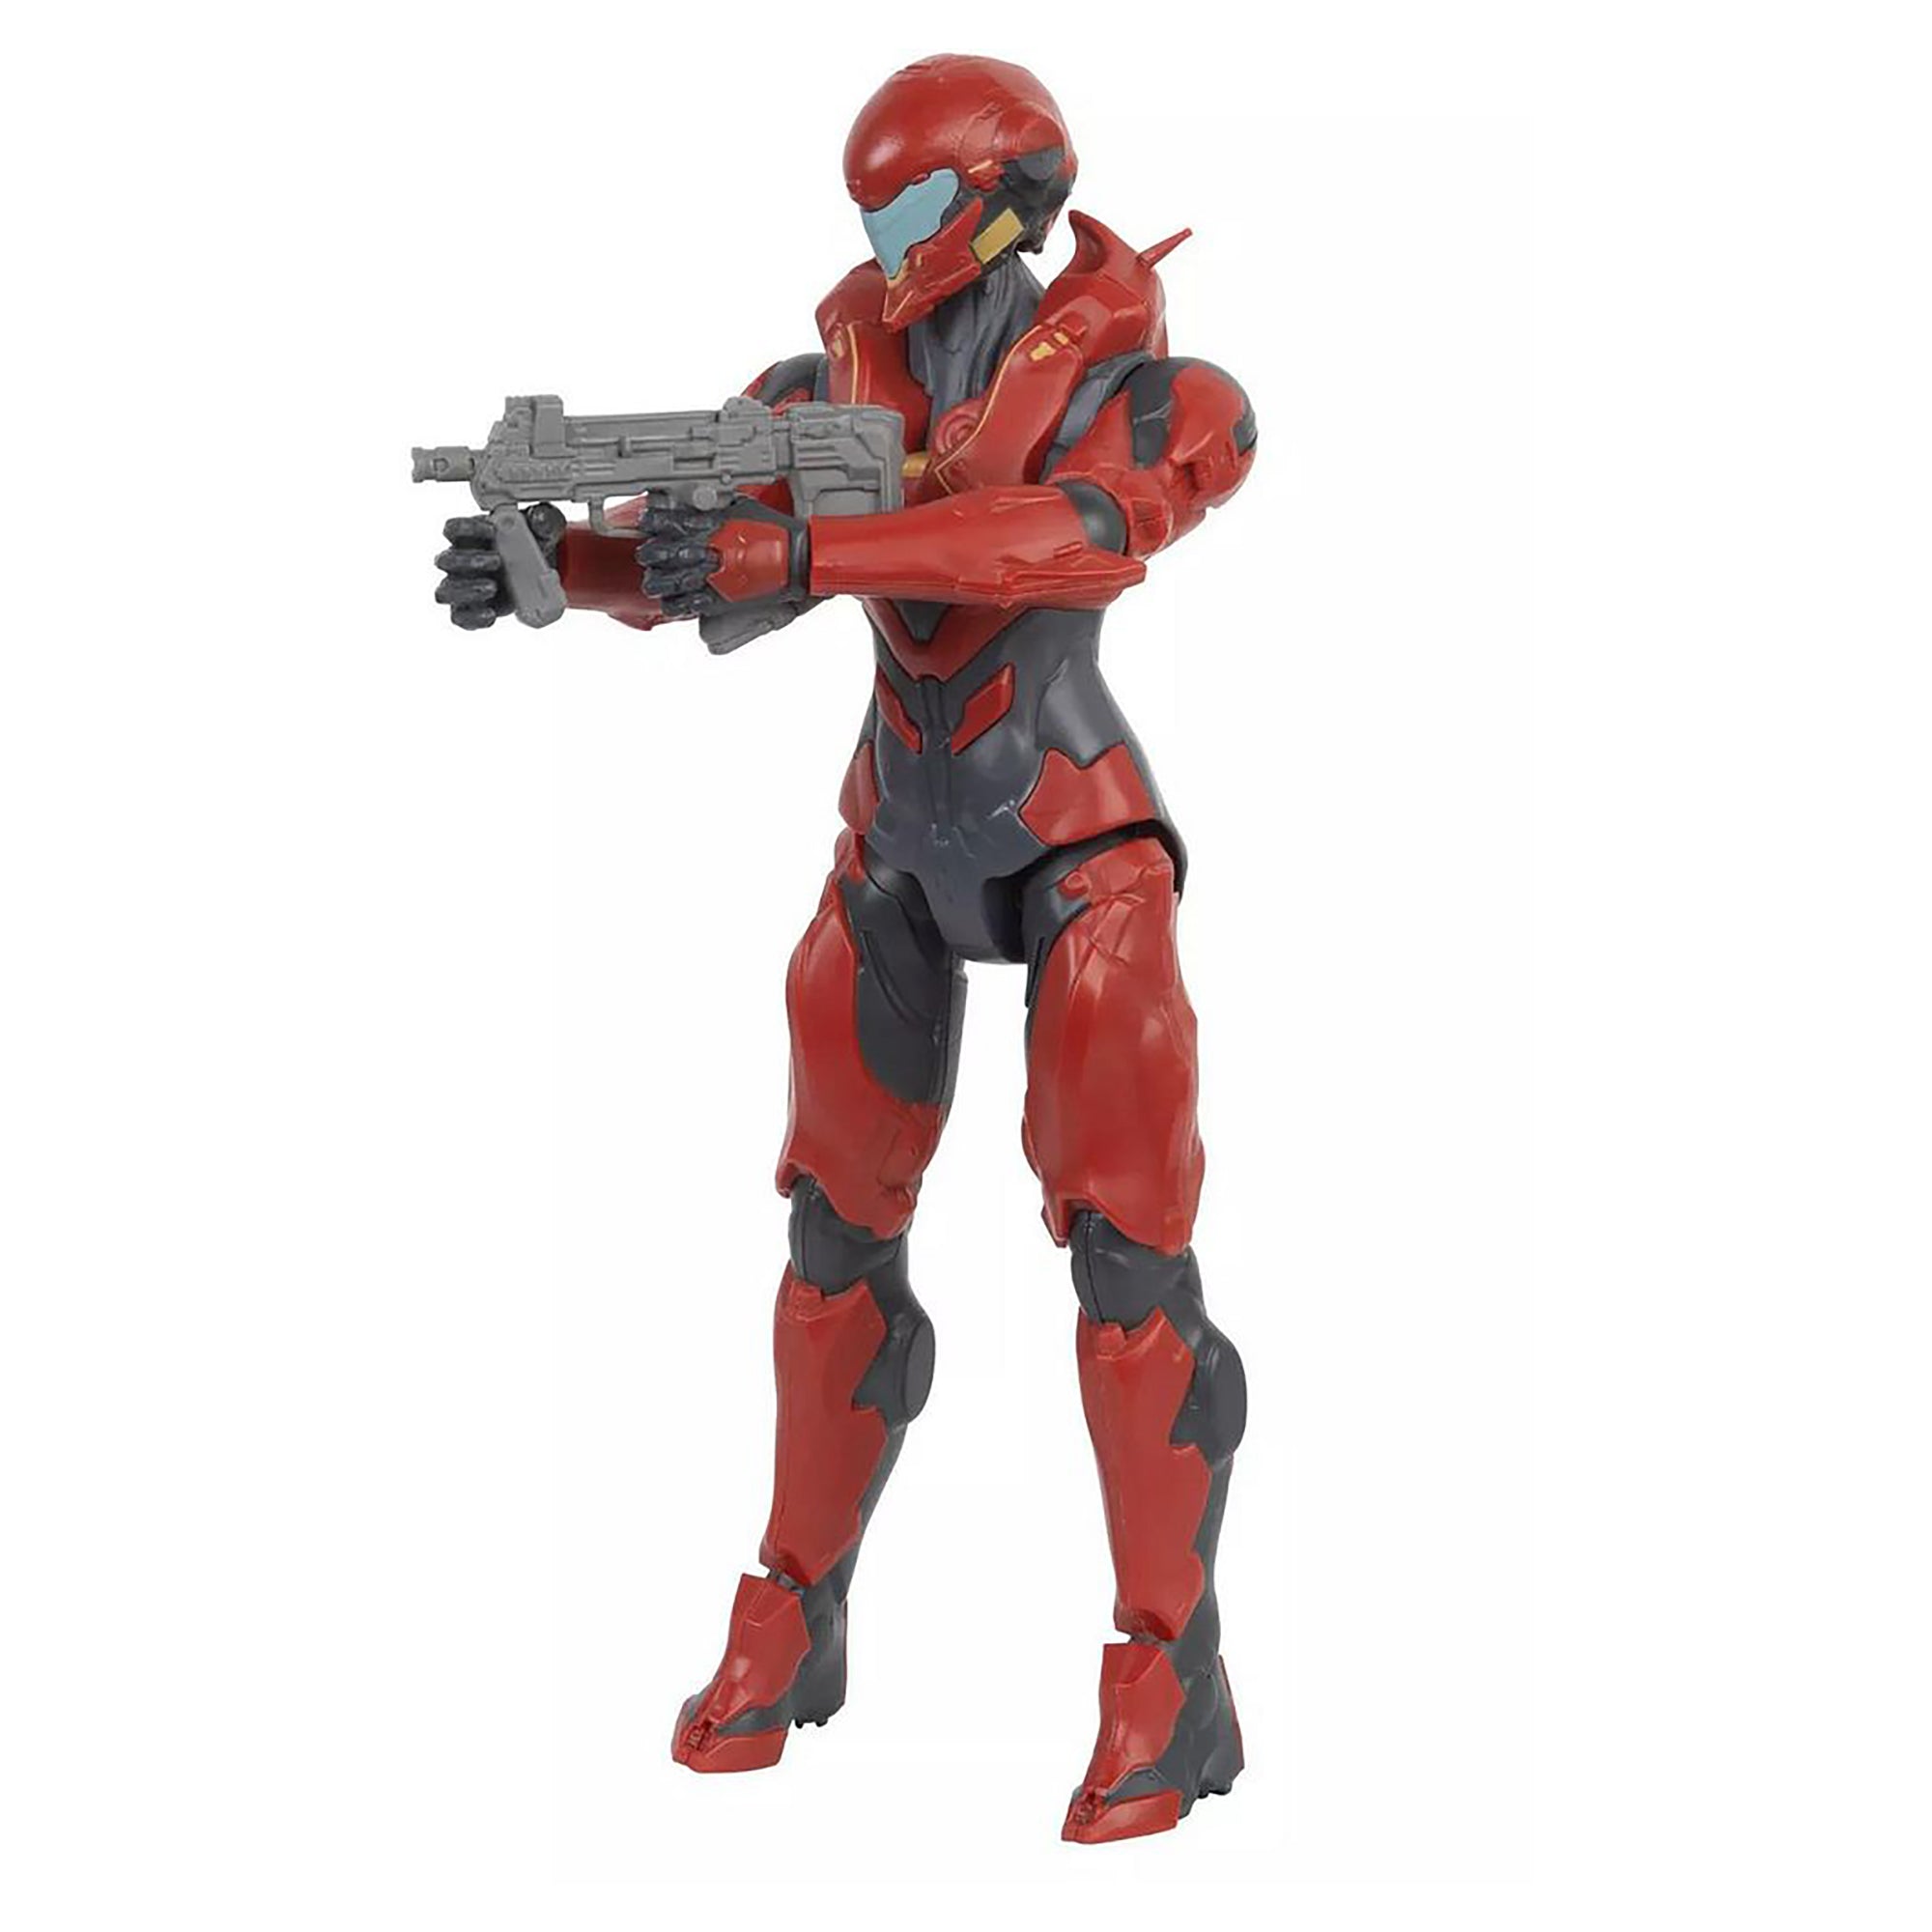 Halo Infinite Spartan Vale with SMG Action Figure (30 cms)